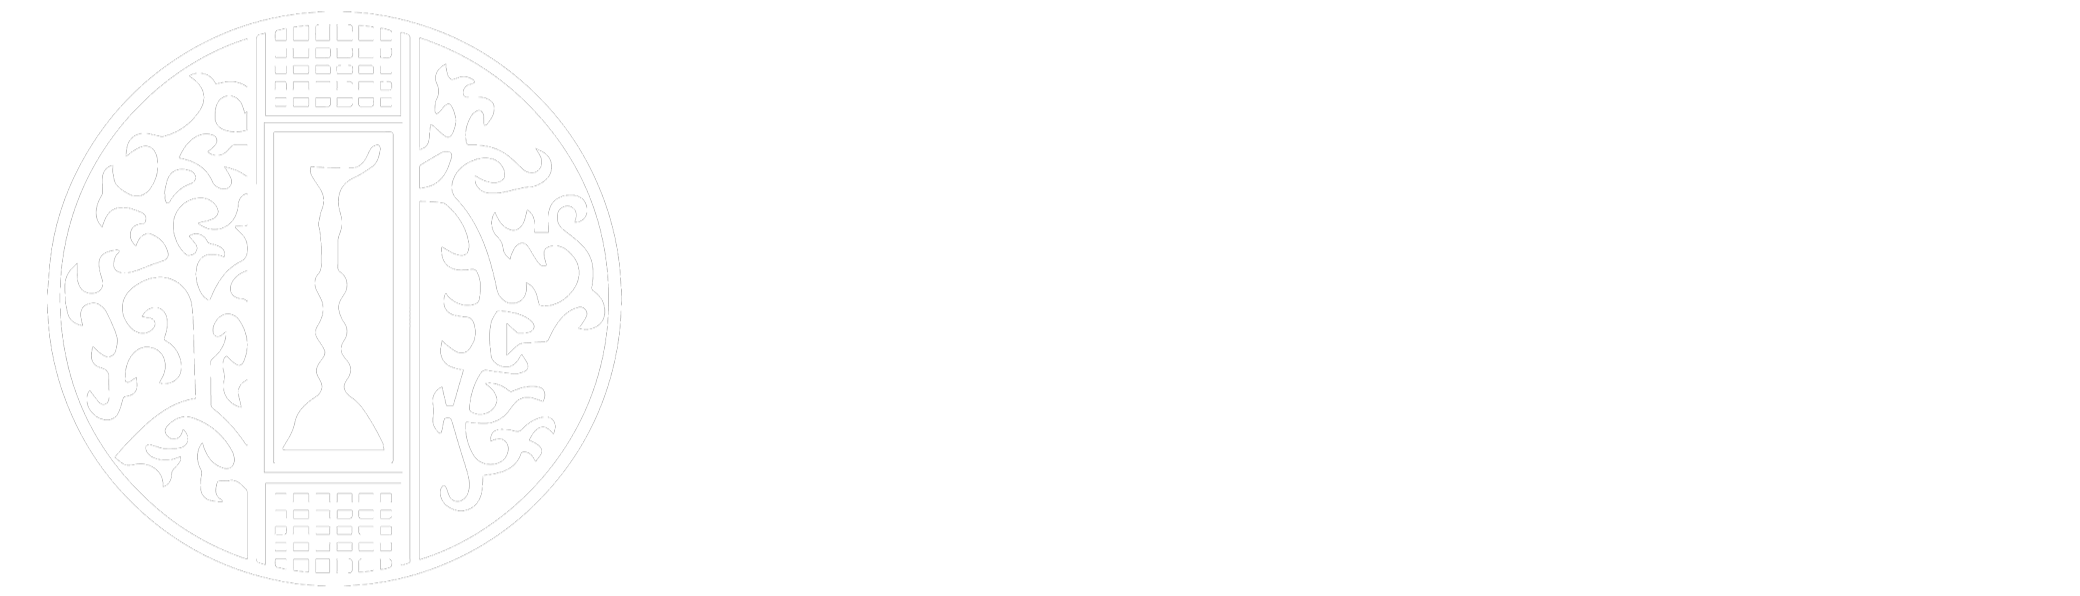 Official website of Indian Council for Cultural Relations, Government of India